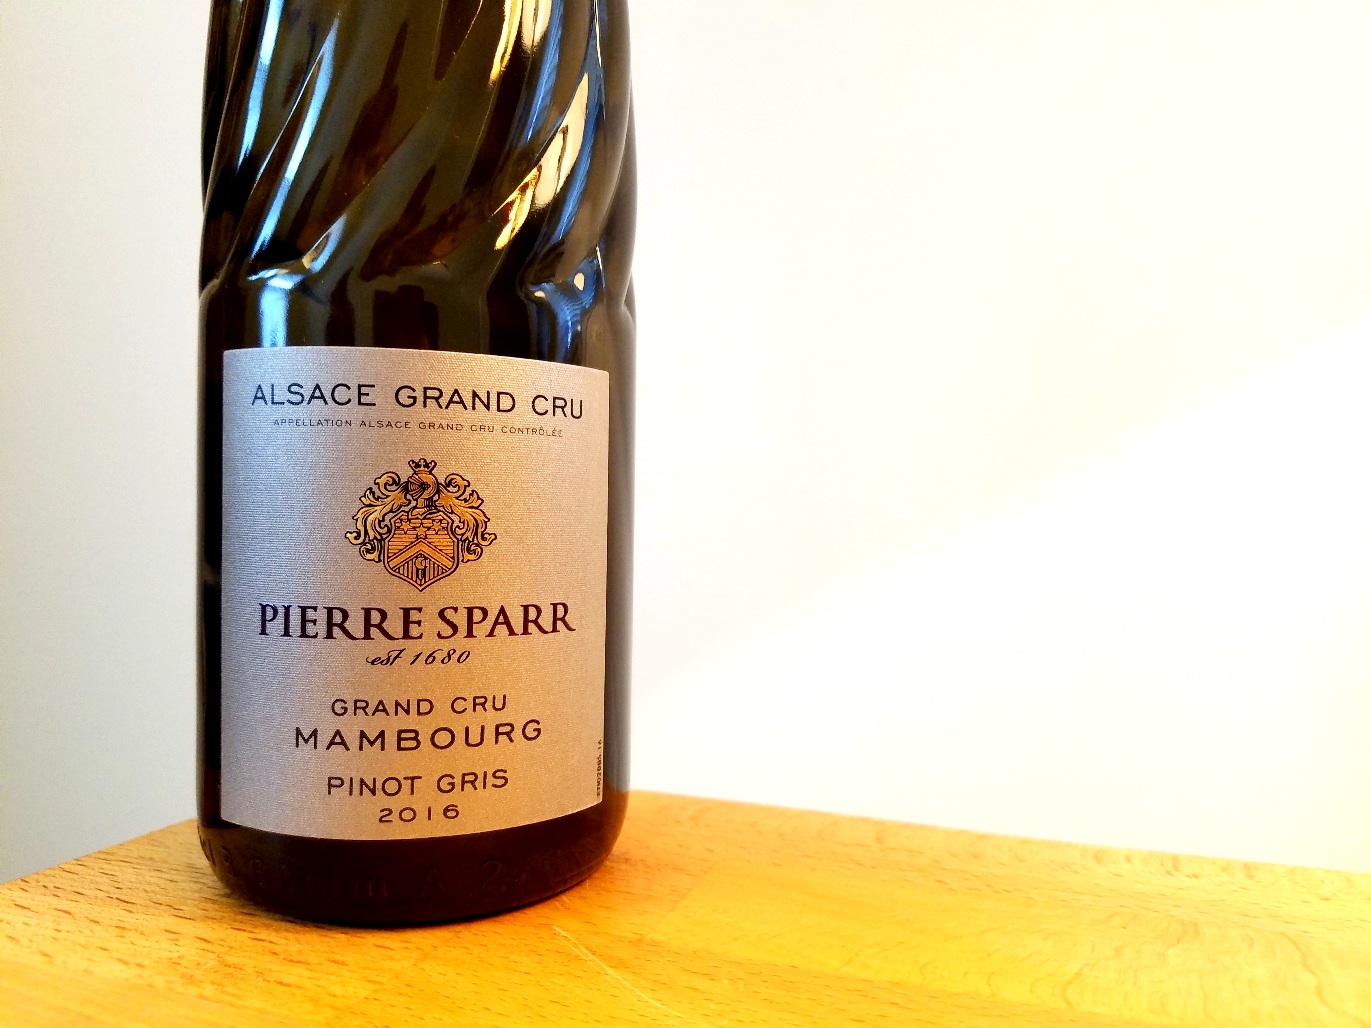 Pierre Sparr, Mambourg Pinot Gris 2016, Alsace Grand Cru, France, Wine Casual